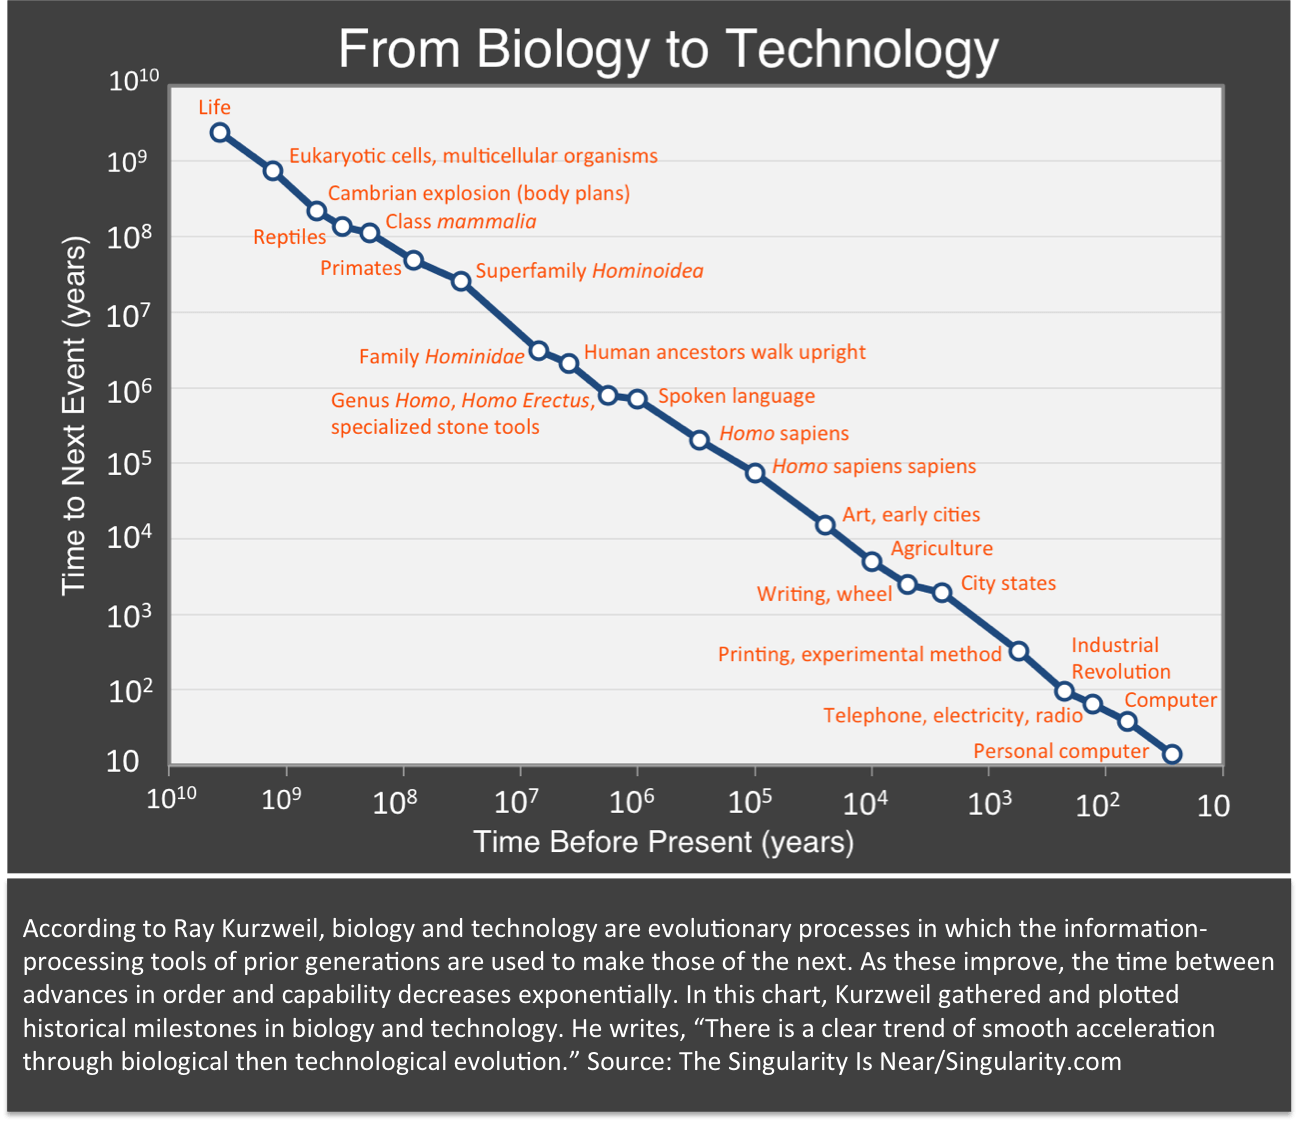 New Paradigms & the Exponential Growth of Knowledge